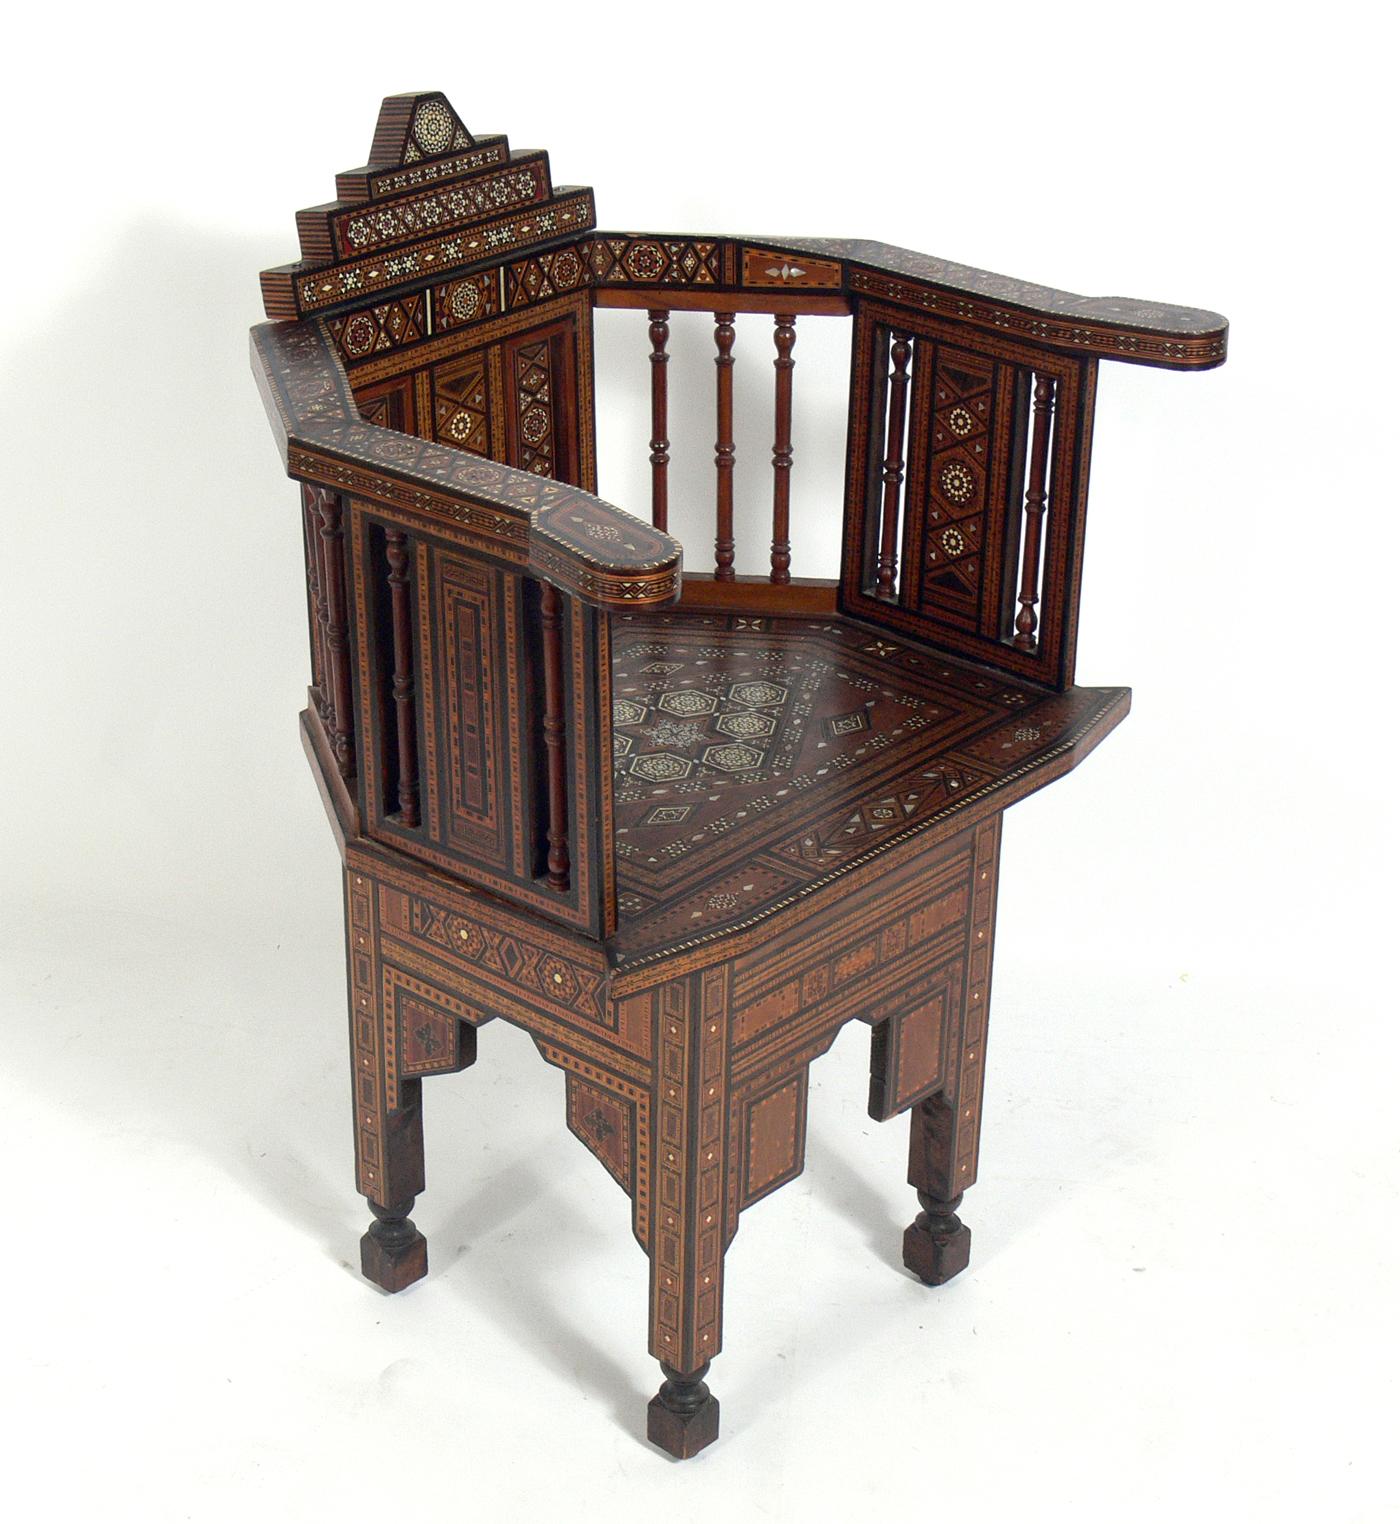 Inlaid Moroccan chair, in the manner of Carlo Bugatti, Moroccan, circa 1950s. Completely hand made with intricate inlay throughout. Retains warm original patina.